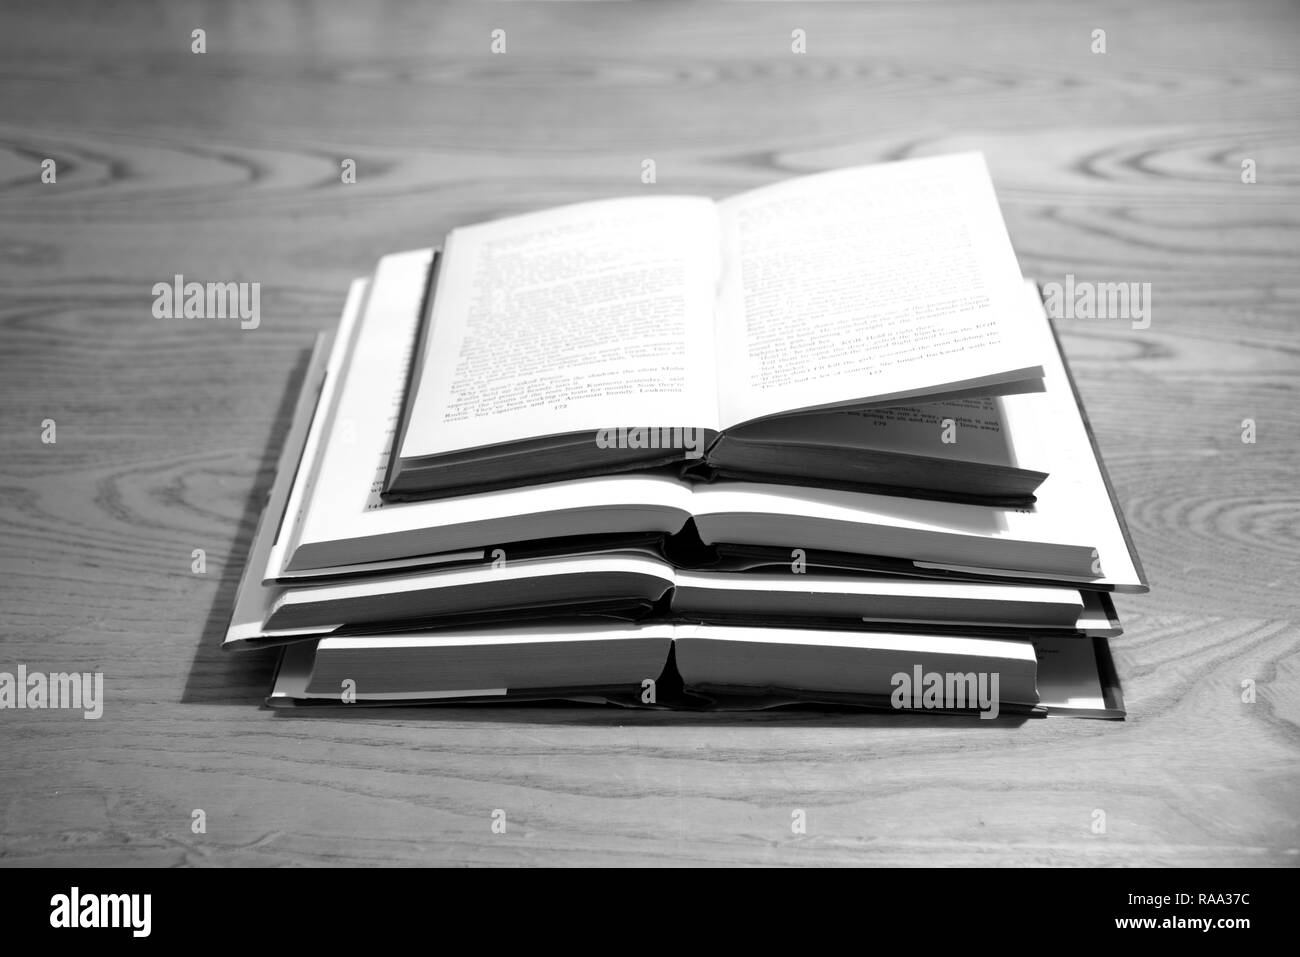 Pile of open books on a desk Stock Photo